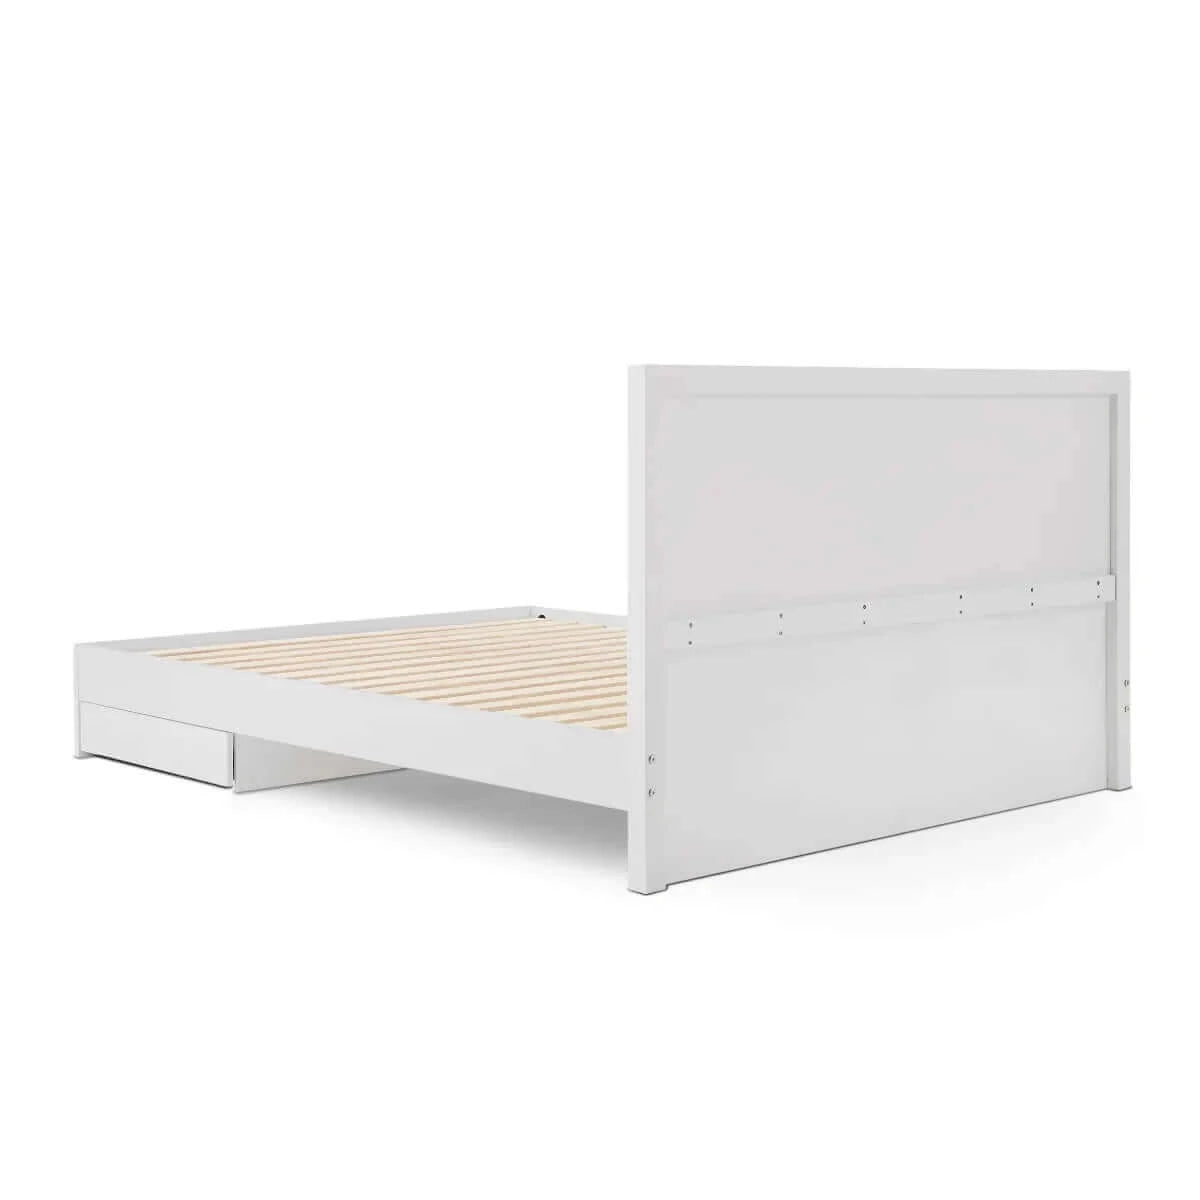 Buy tracey column bed frame with storage - queen - upinteriors-Upinteriors